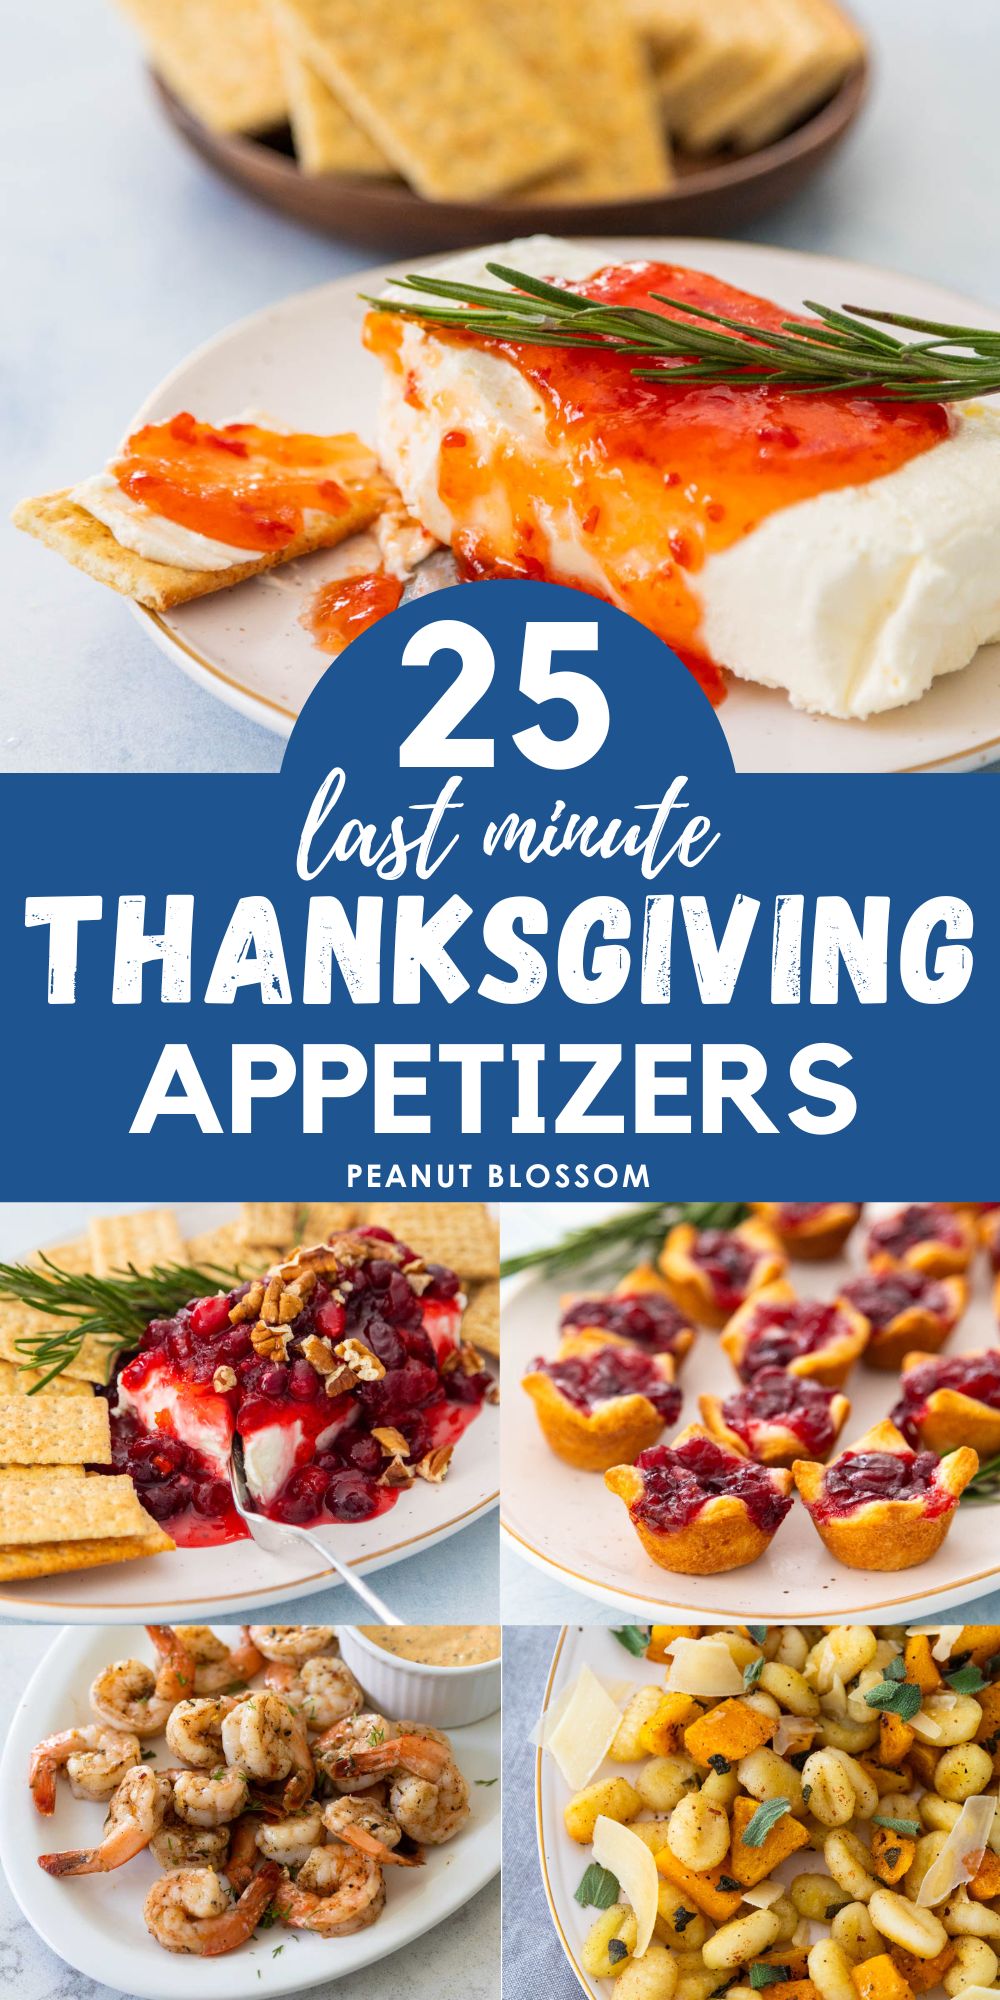 The photo collage shows pictures of 5 different easy appetizers for Thanksgiving.